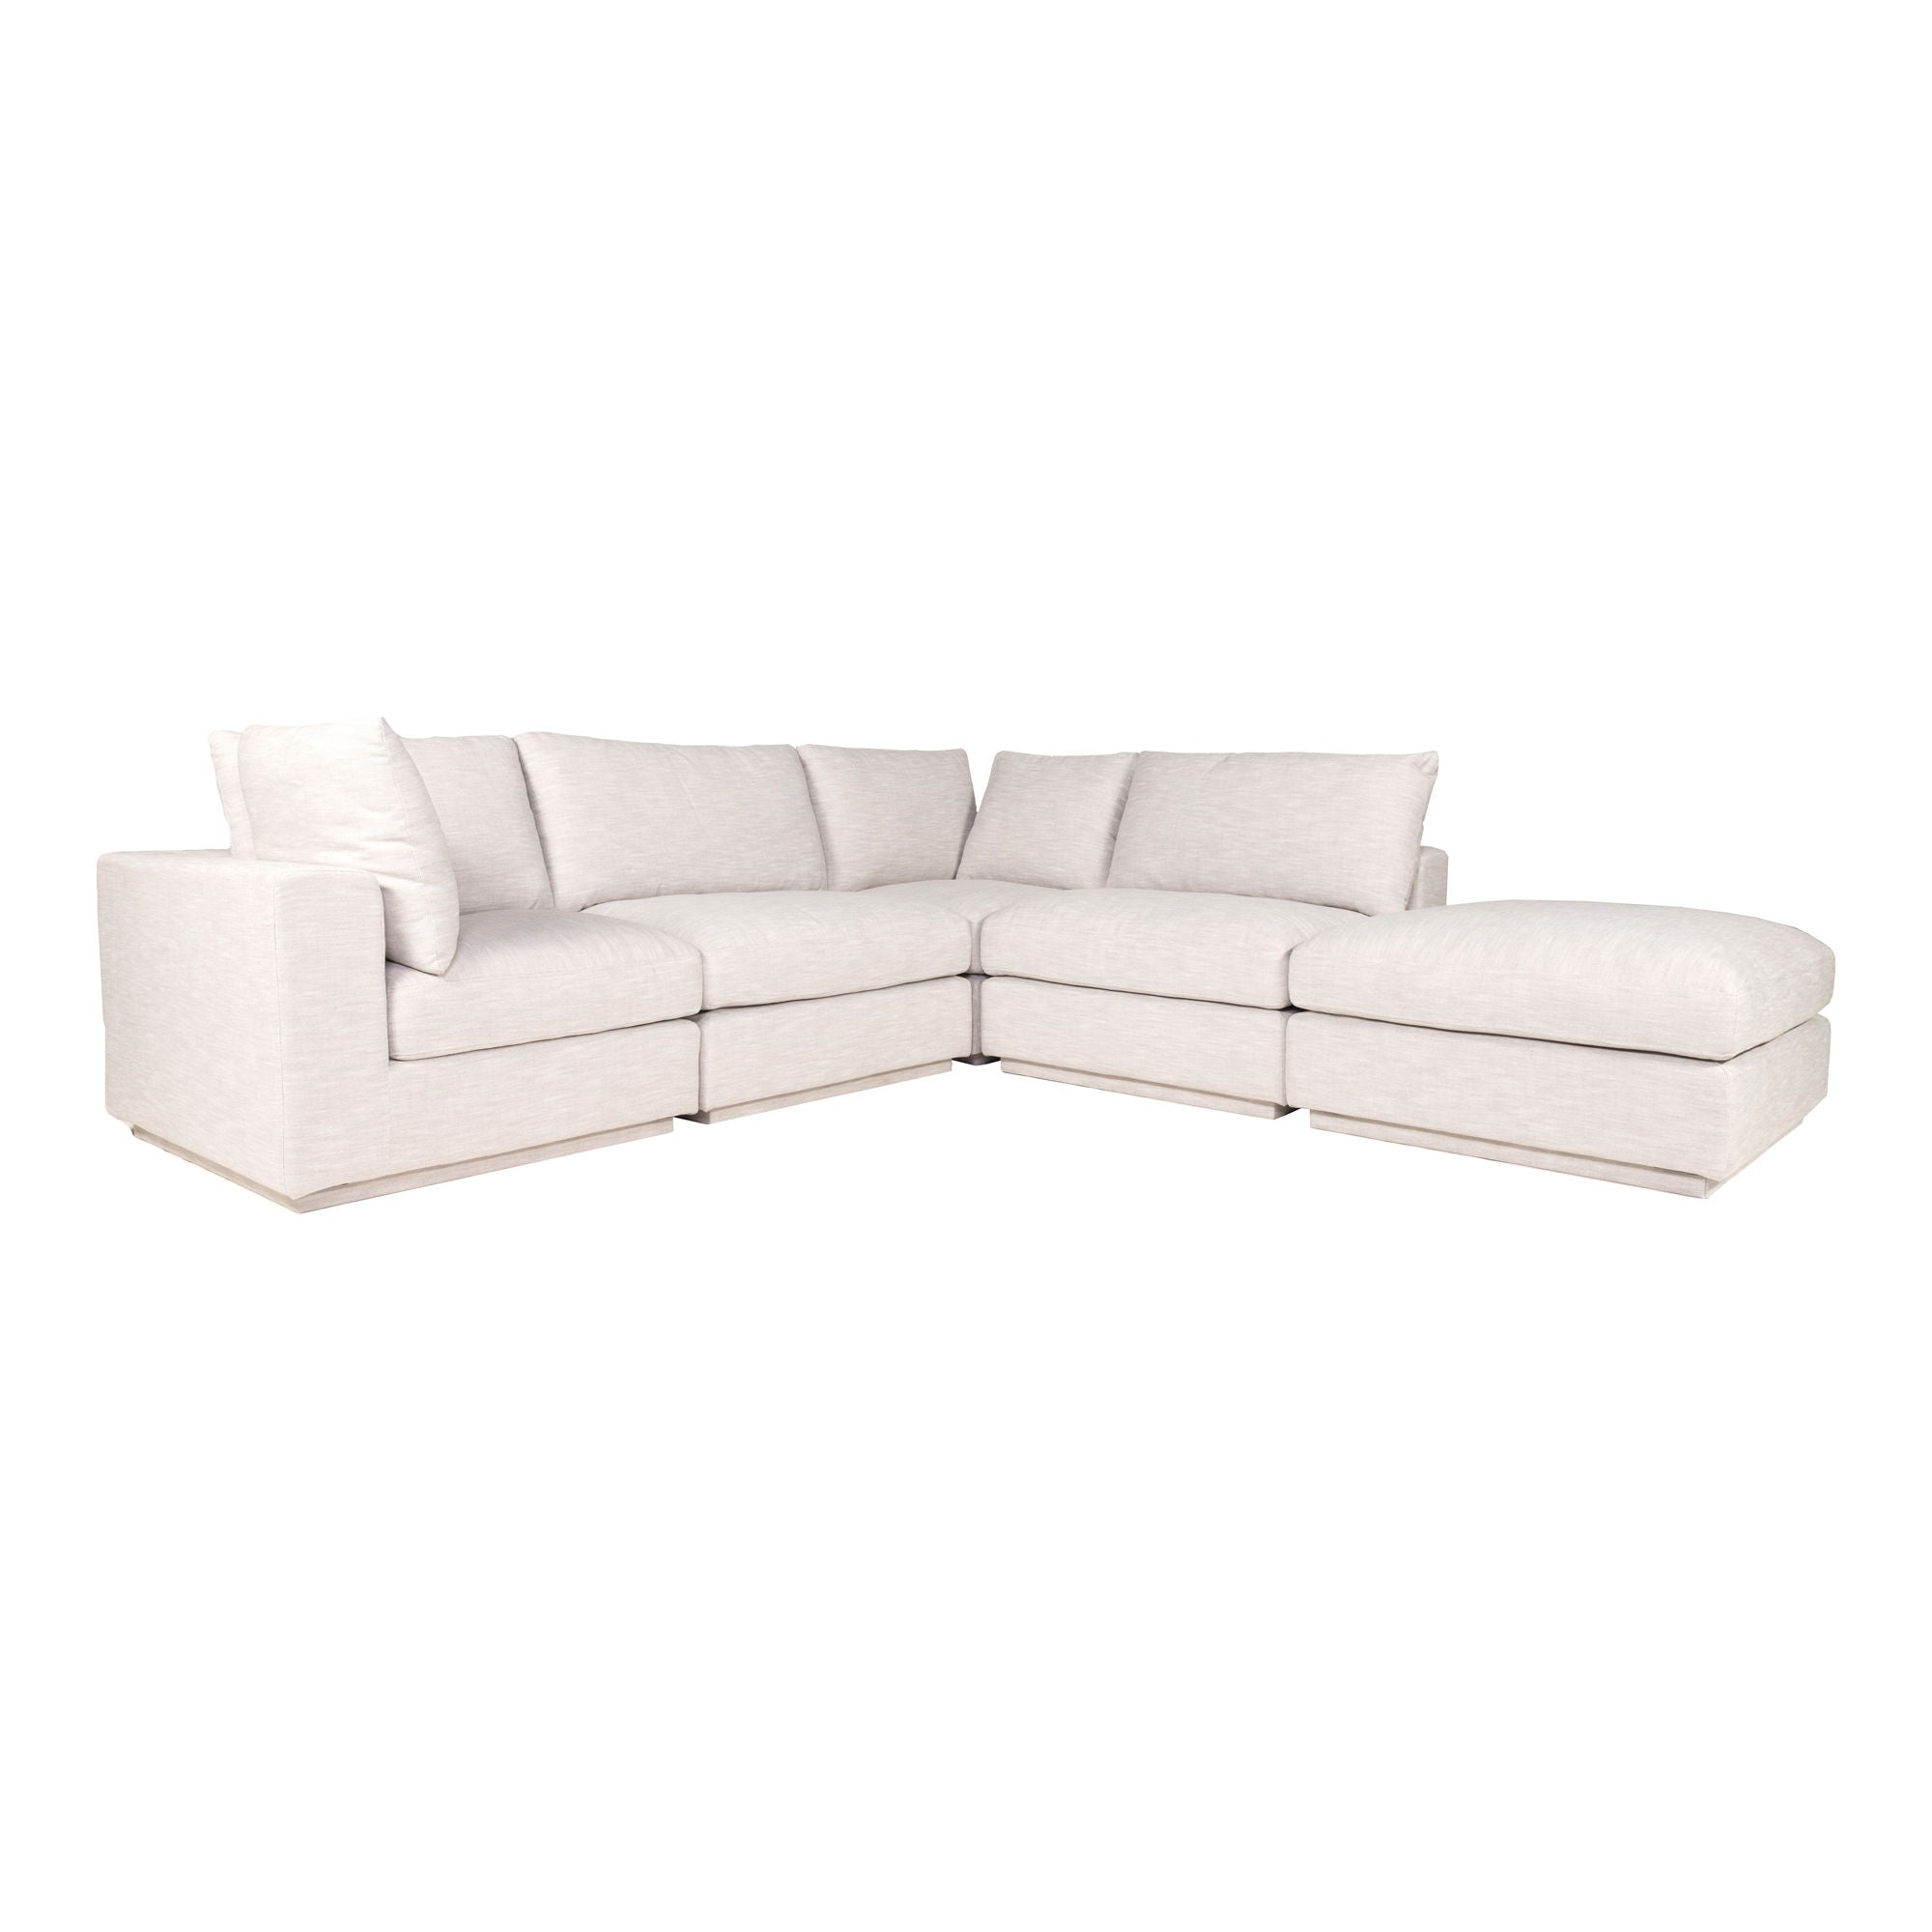 Justin Dream Modular Sectional Taupe - Comfy Living Room-Stationary Sectionals-American Furniture Outlet